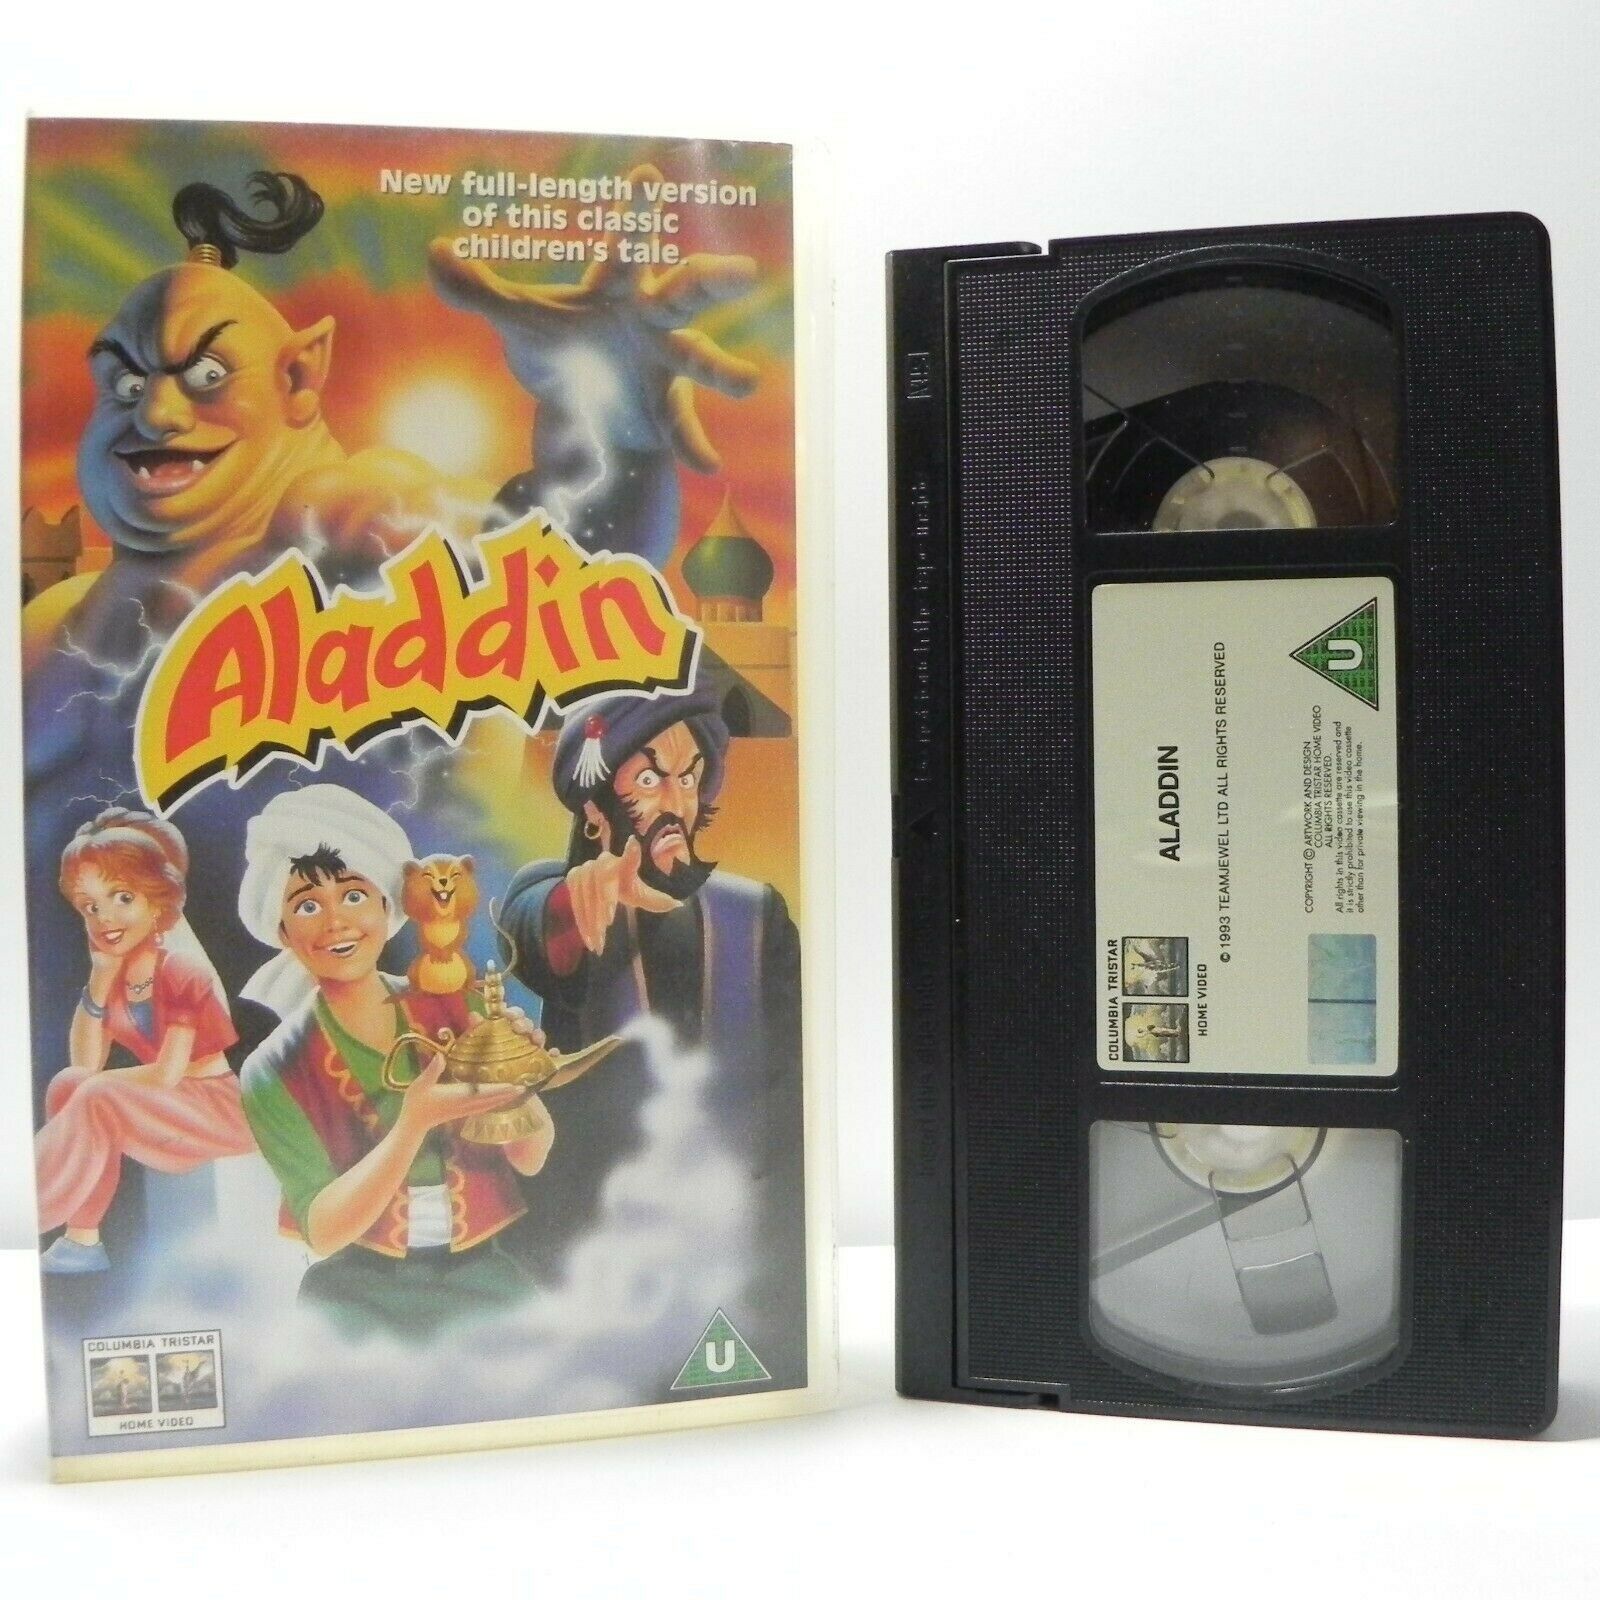 Aladdin - Animated - New Version - Classic Children's Tale - Magical Story  - VHS 5014756131463 – Golden Class Movies LTD